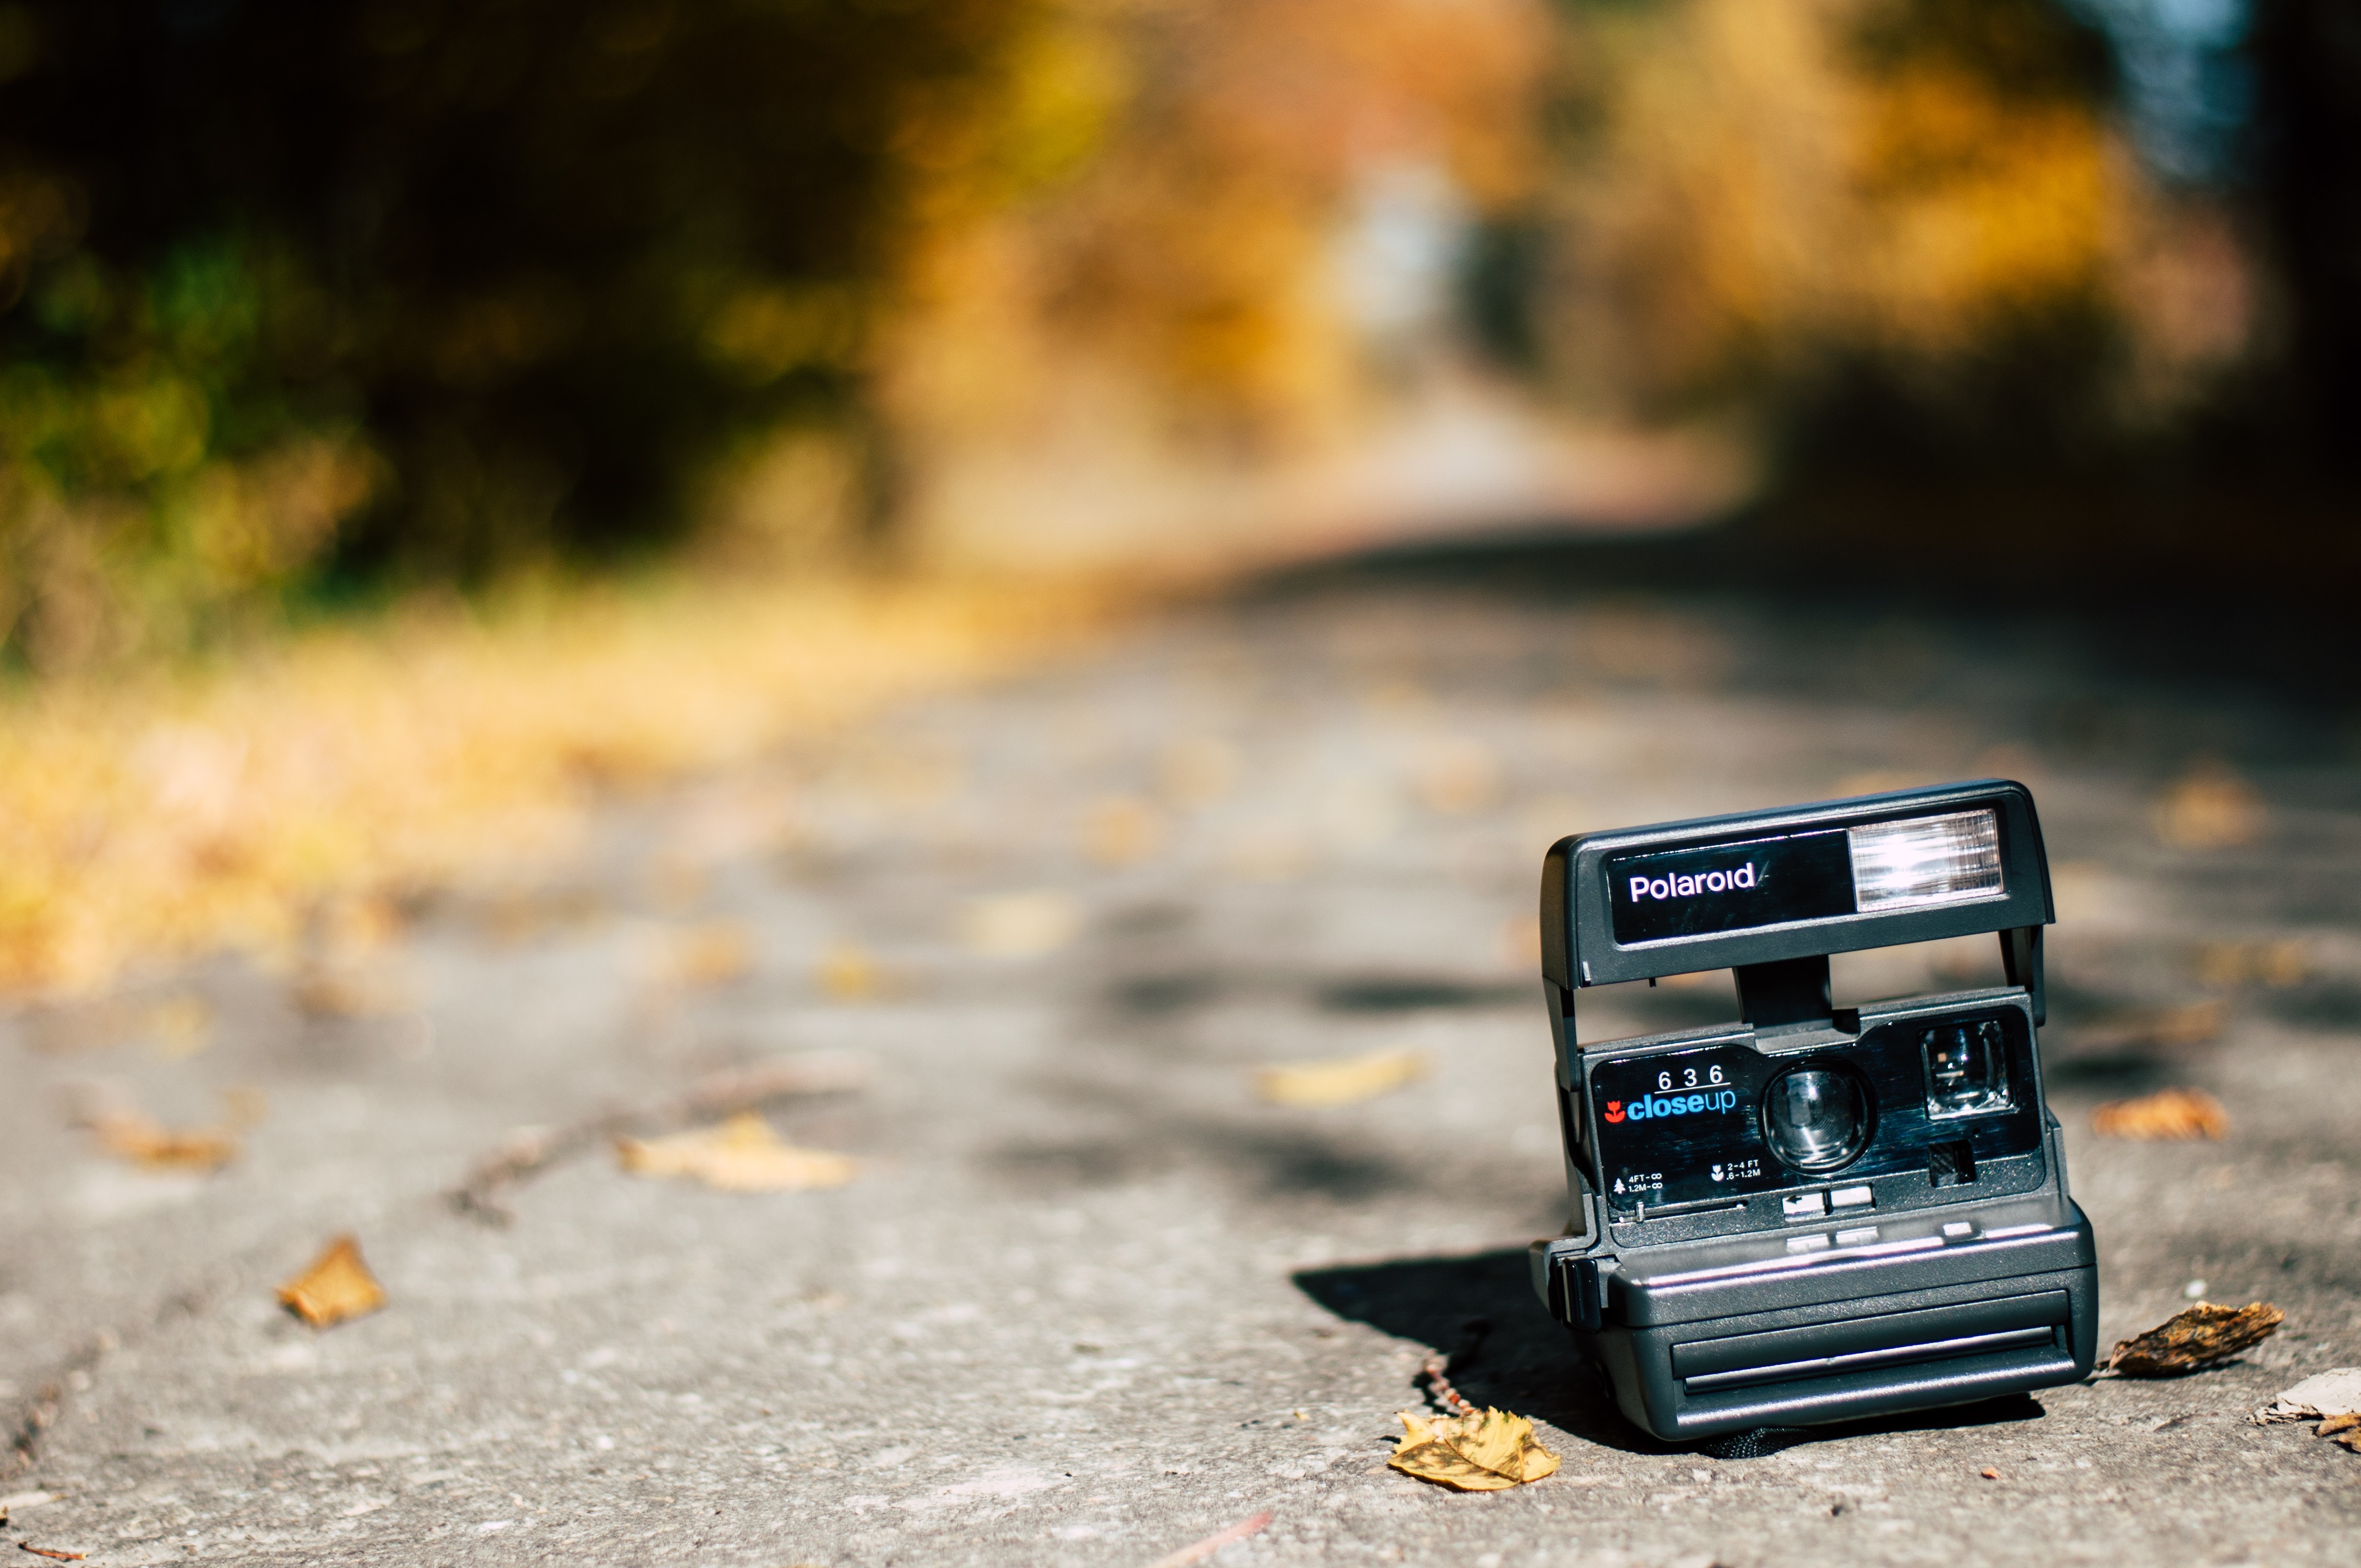 General 4288x2848 polaroid camera leaves road nature technology on the ground depth of field